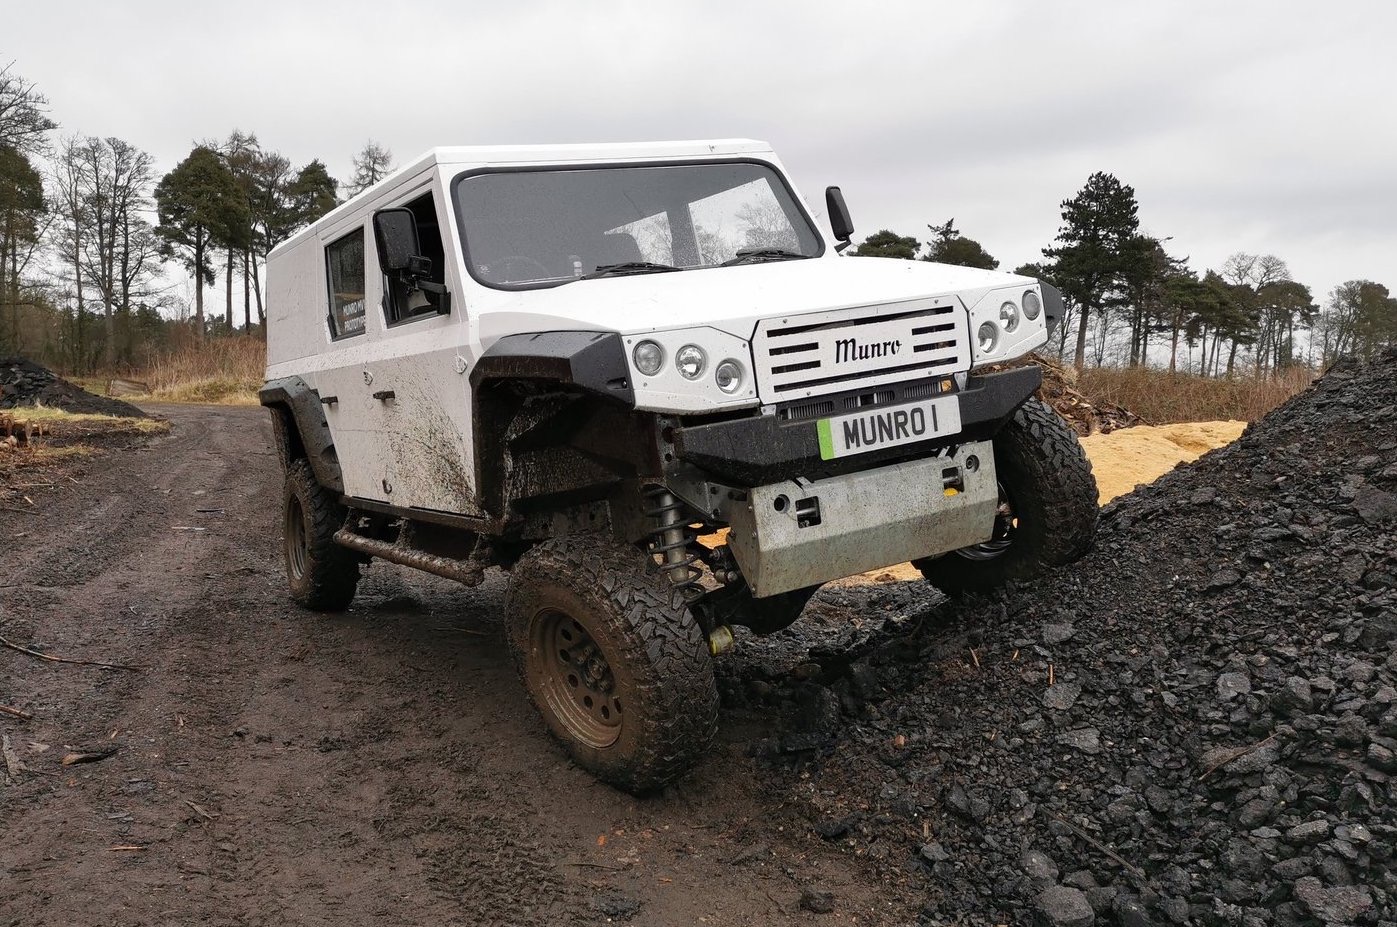 Munro MK 1 aims to be “world’s most capable” electric 4×4